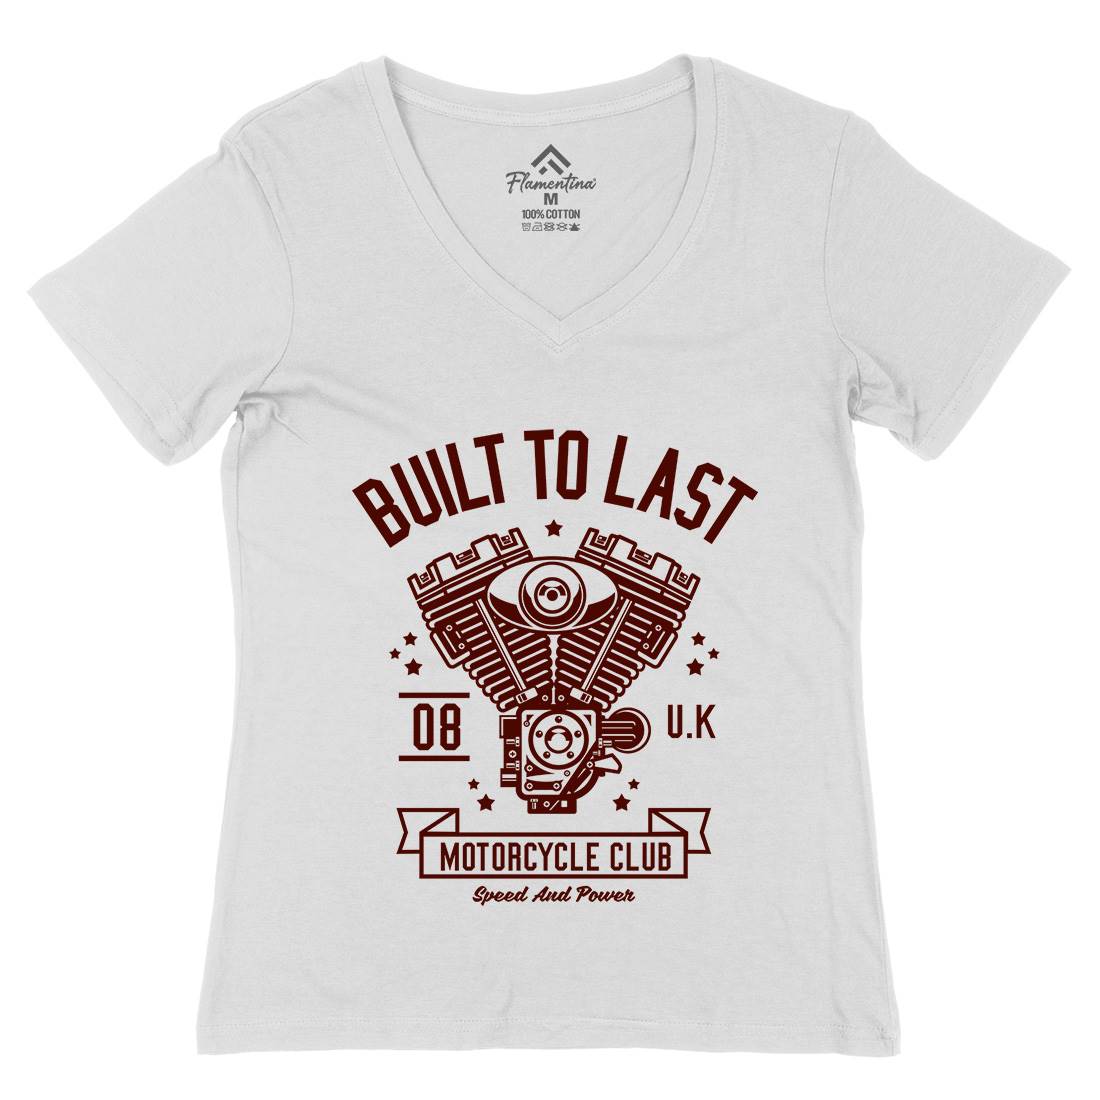 Built To Last Womens Organic V-Neck T-Shirt Motorcycles A215